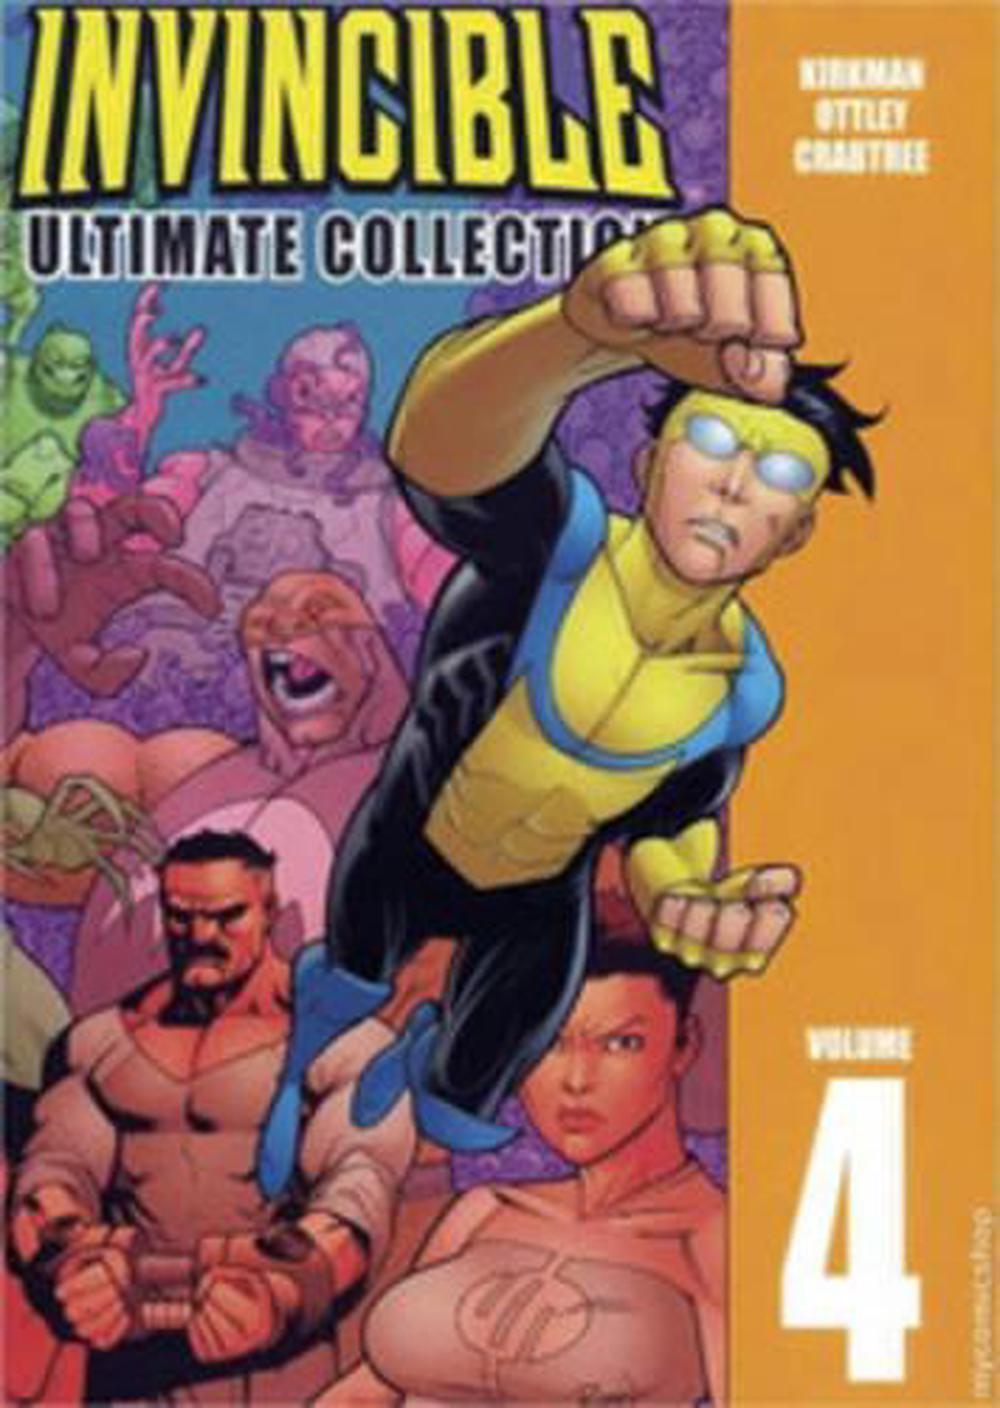 Invincible: The Ultimate Collection Volume 4 by Robert Kirkman (English) Hardcov